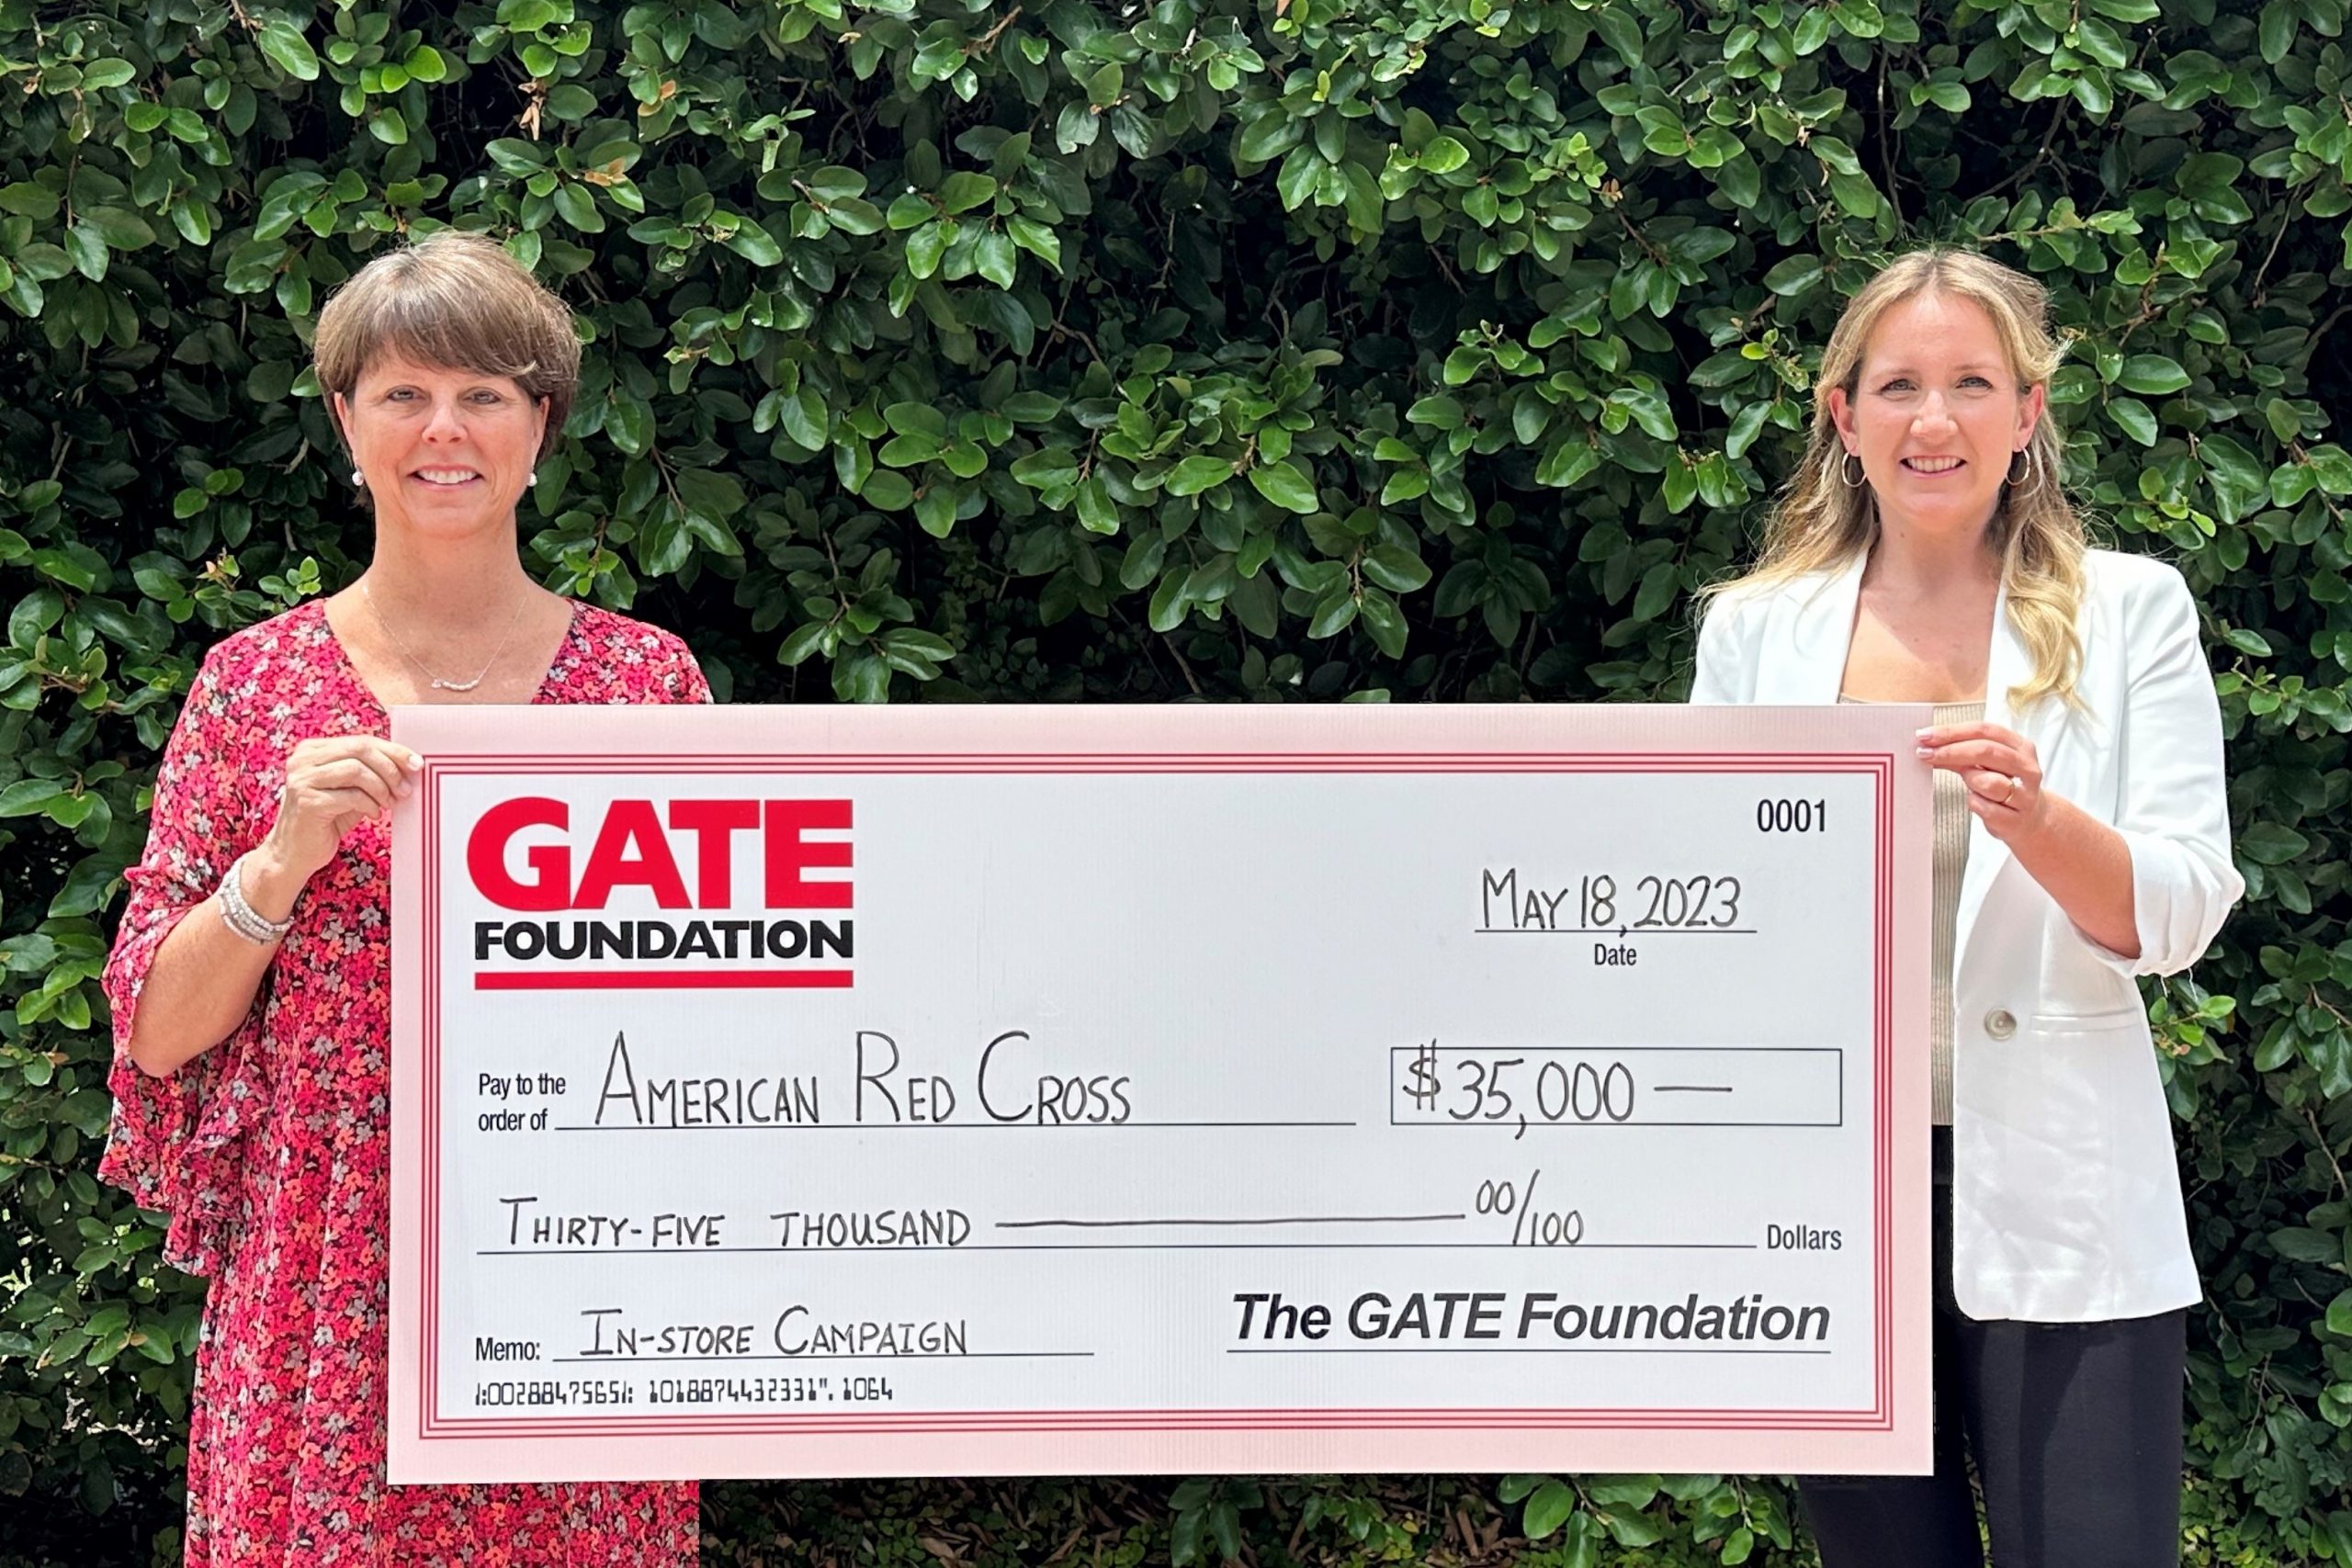 GATE STORES, FOUNDATION RAISE $35,000 FOR THE AMERICAN RED CROSS